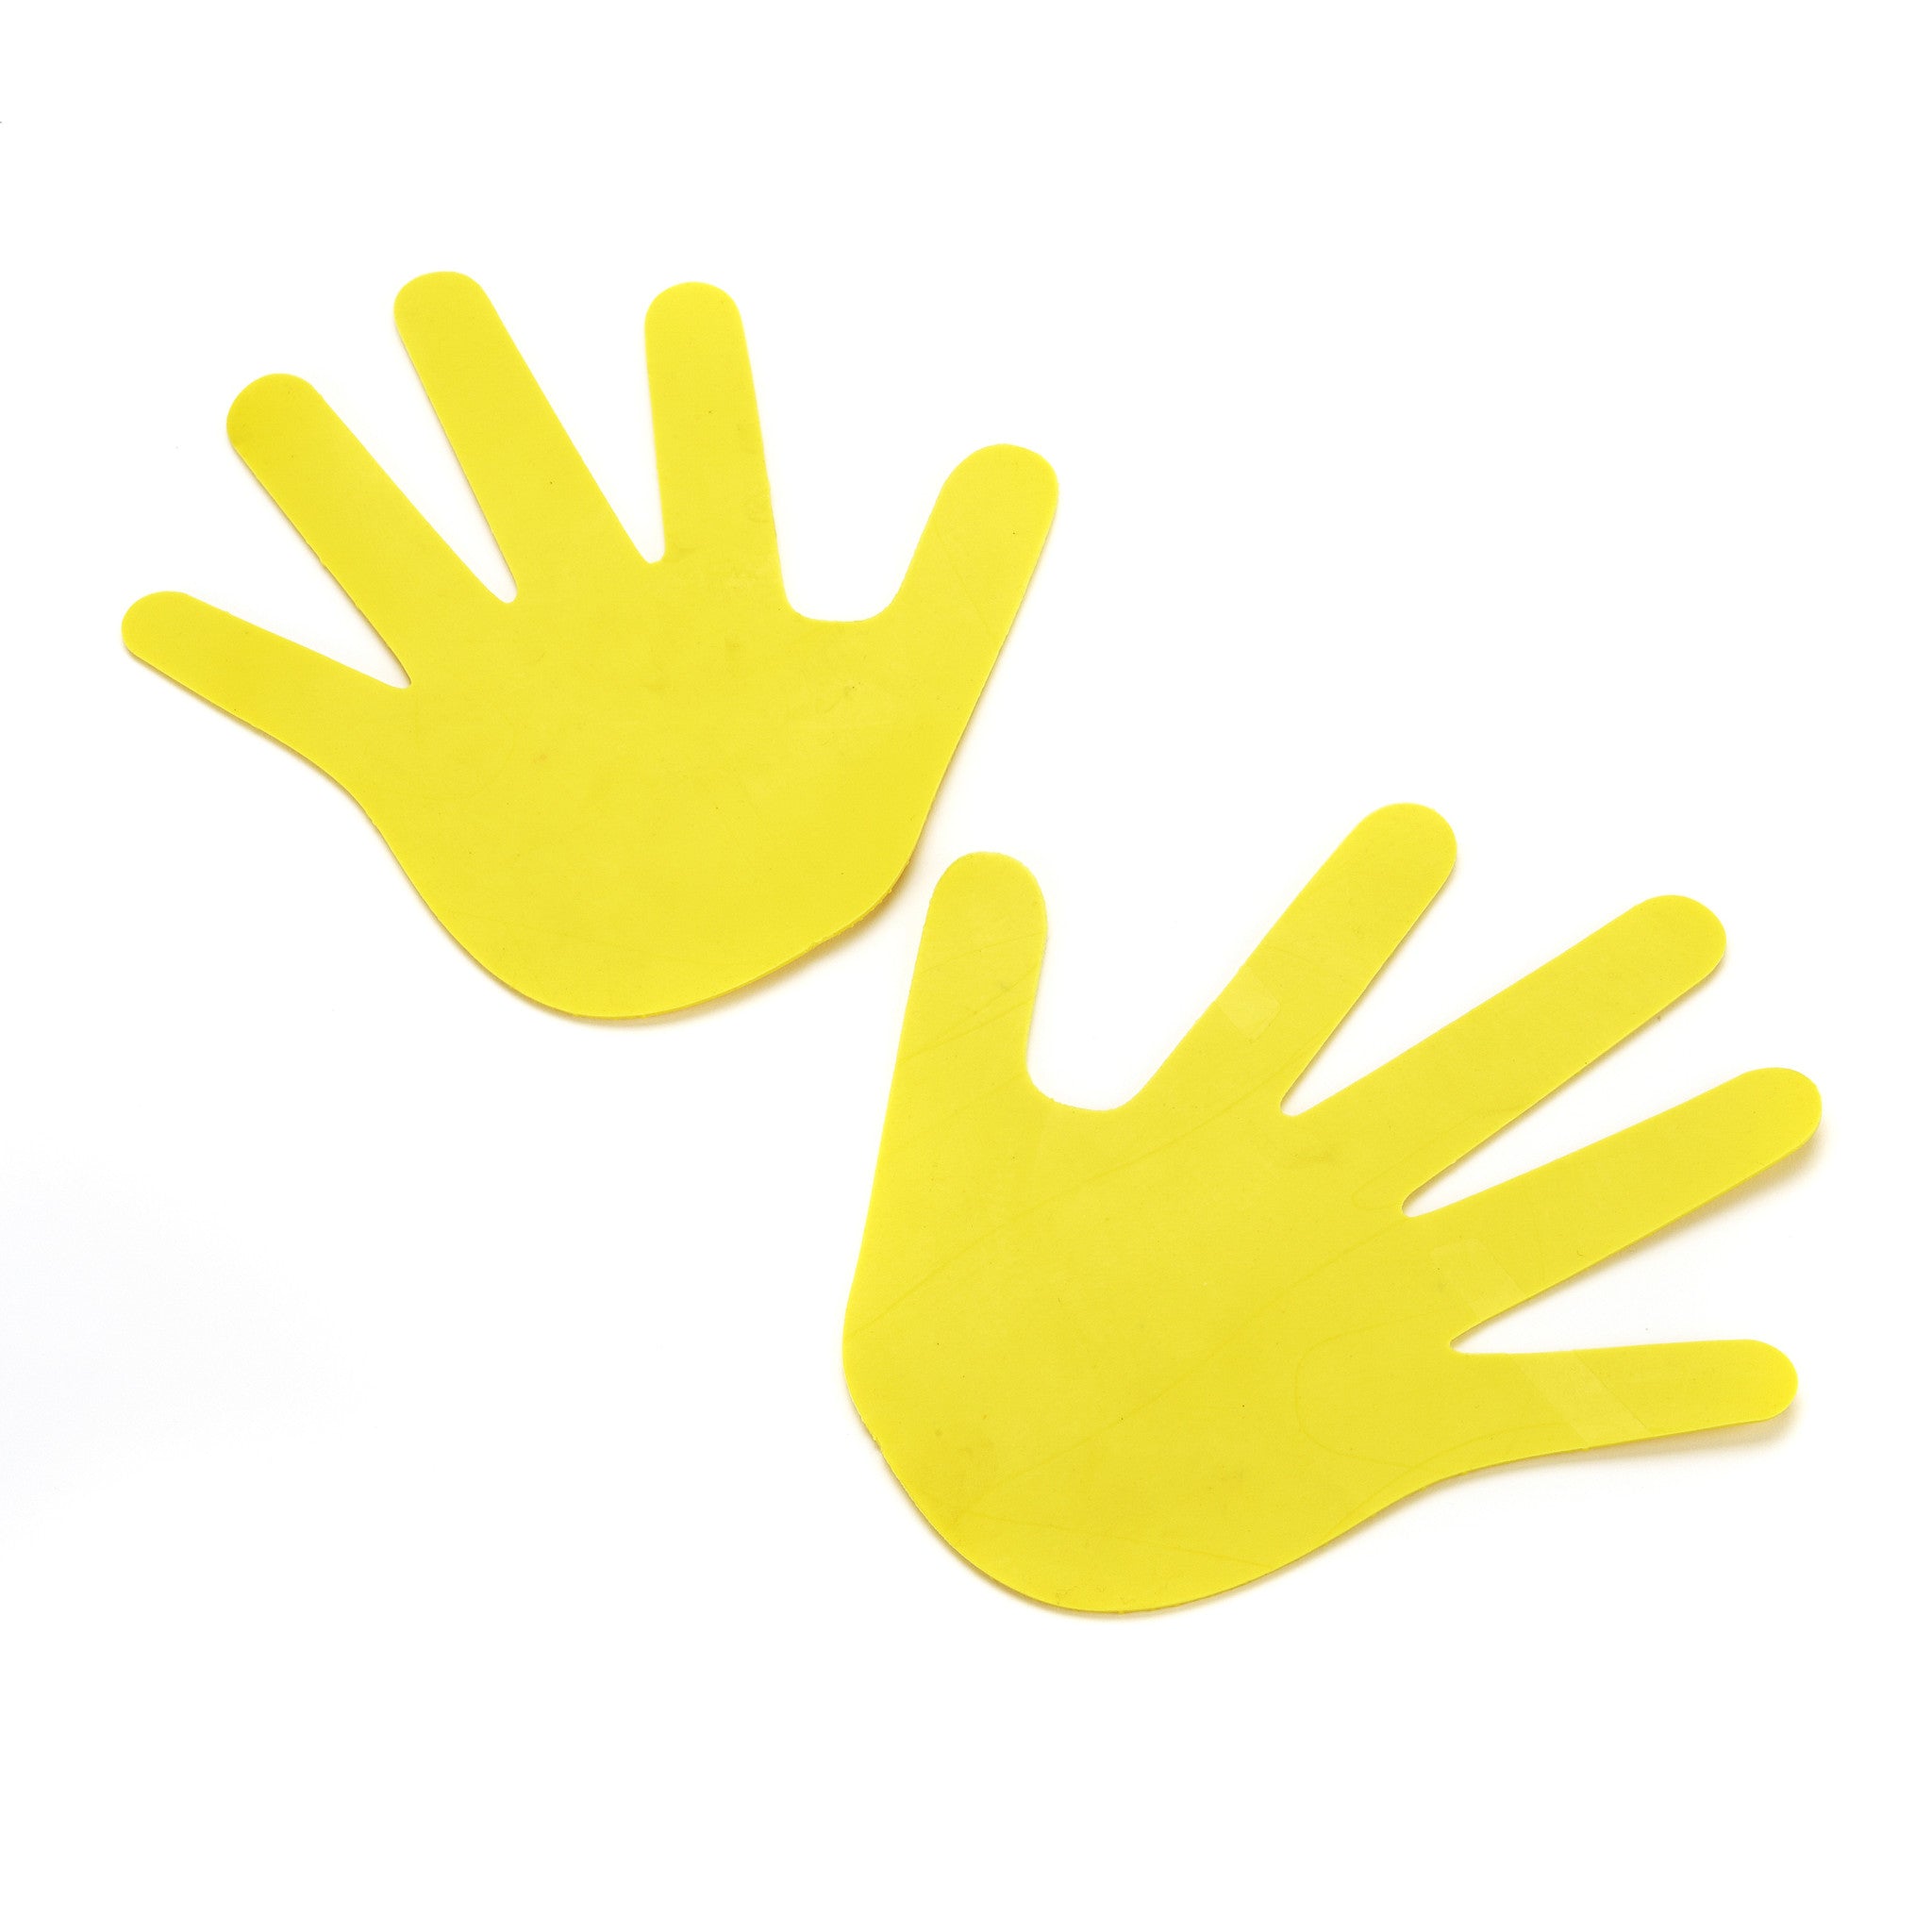 Pair of bright yellow hands - flat floor markers for Early Years classes